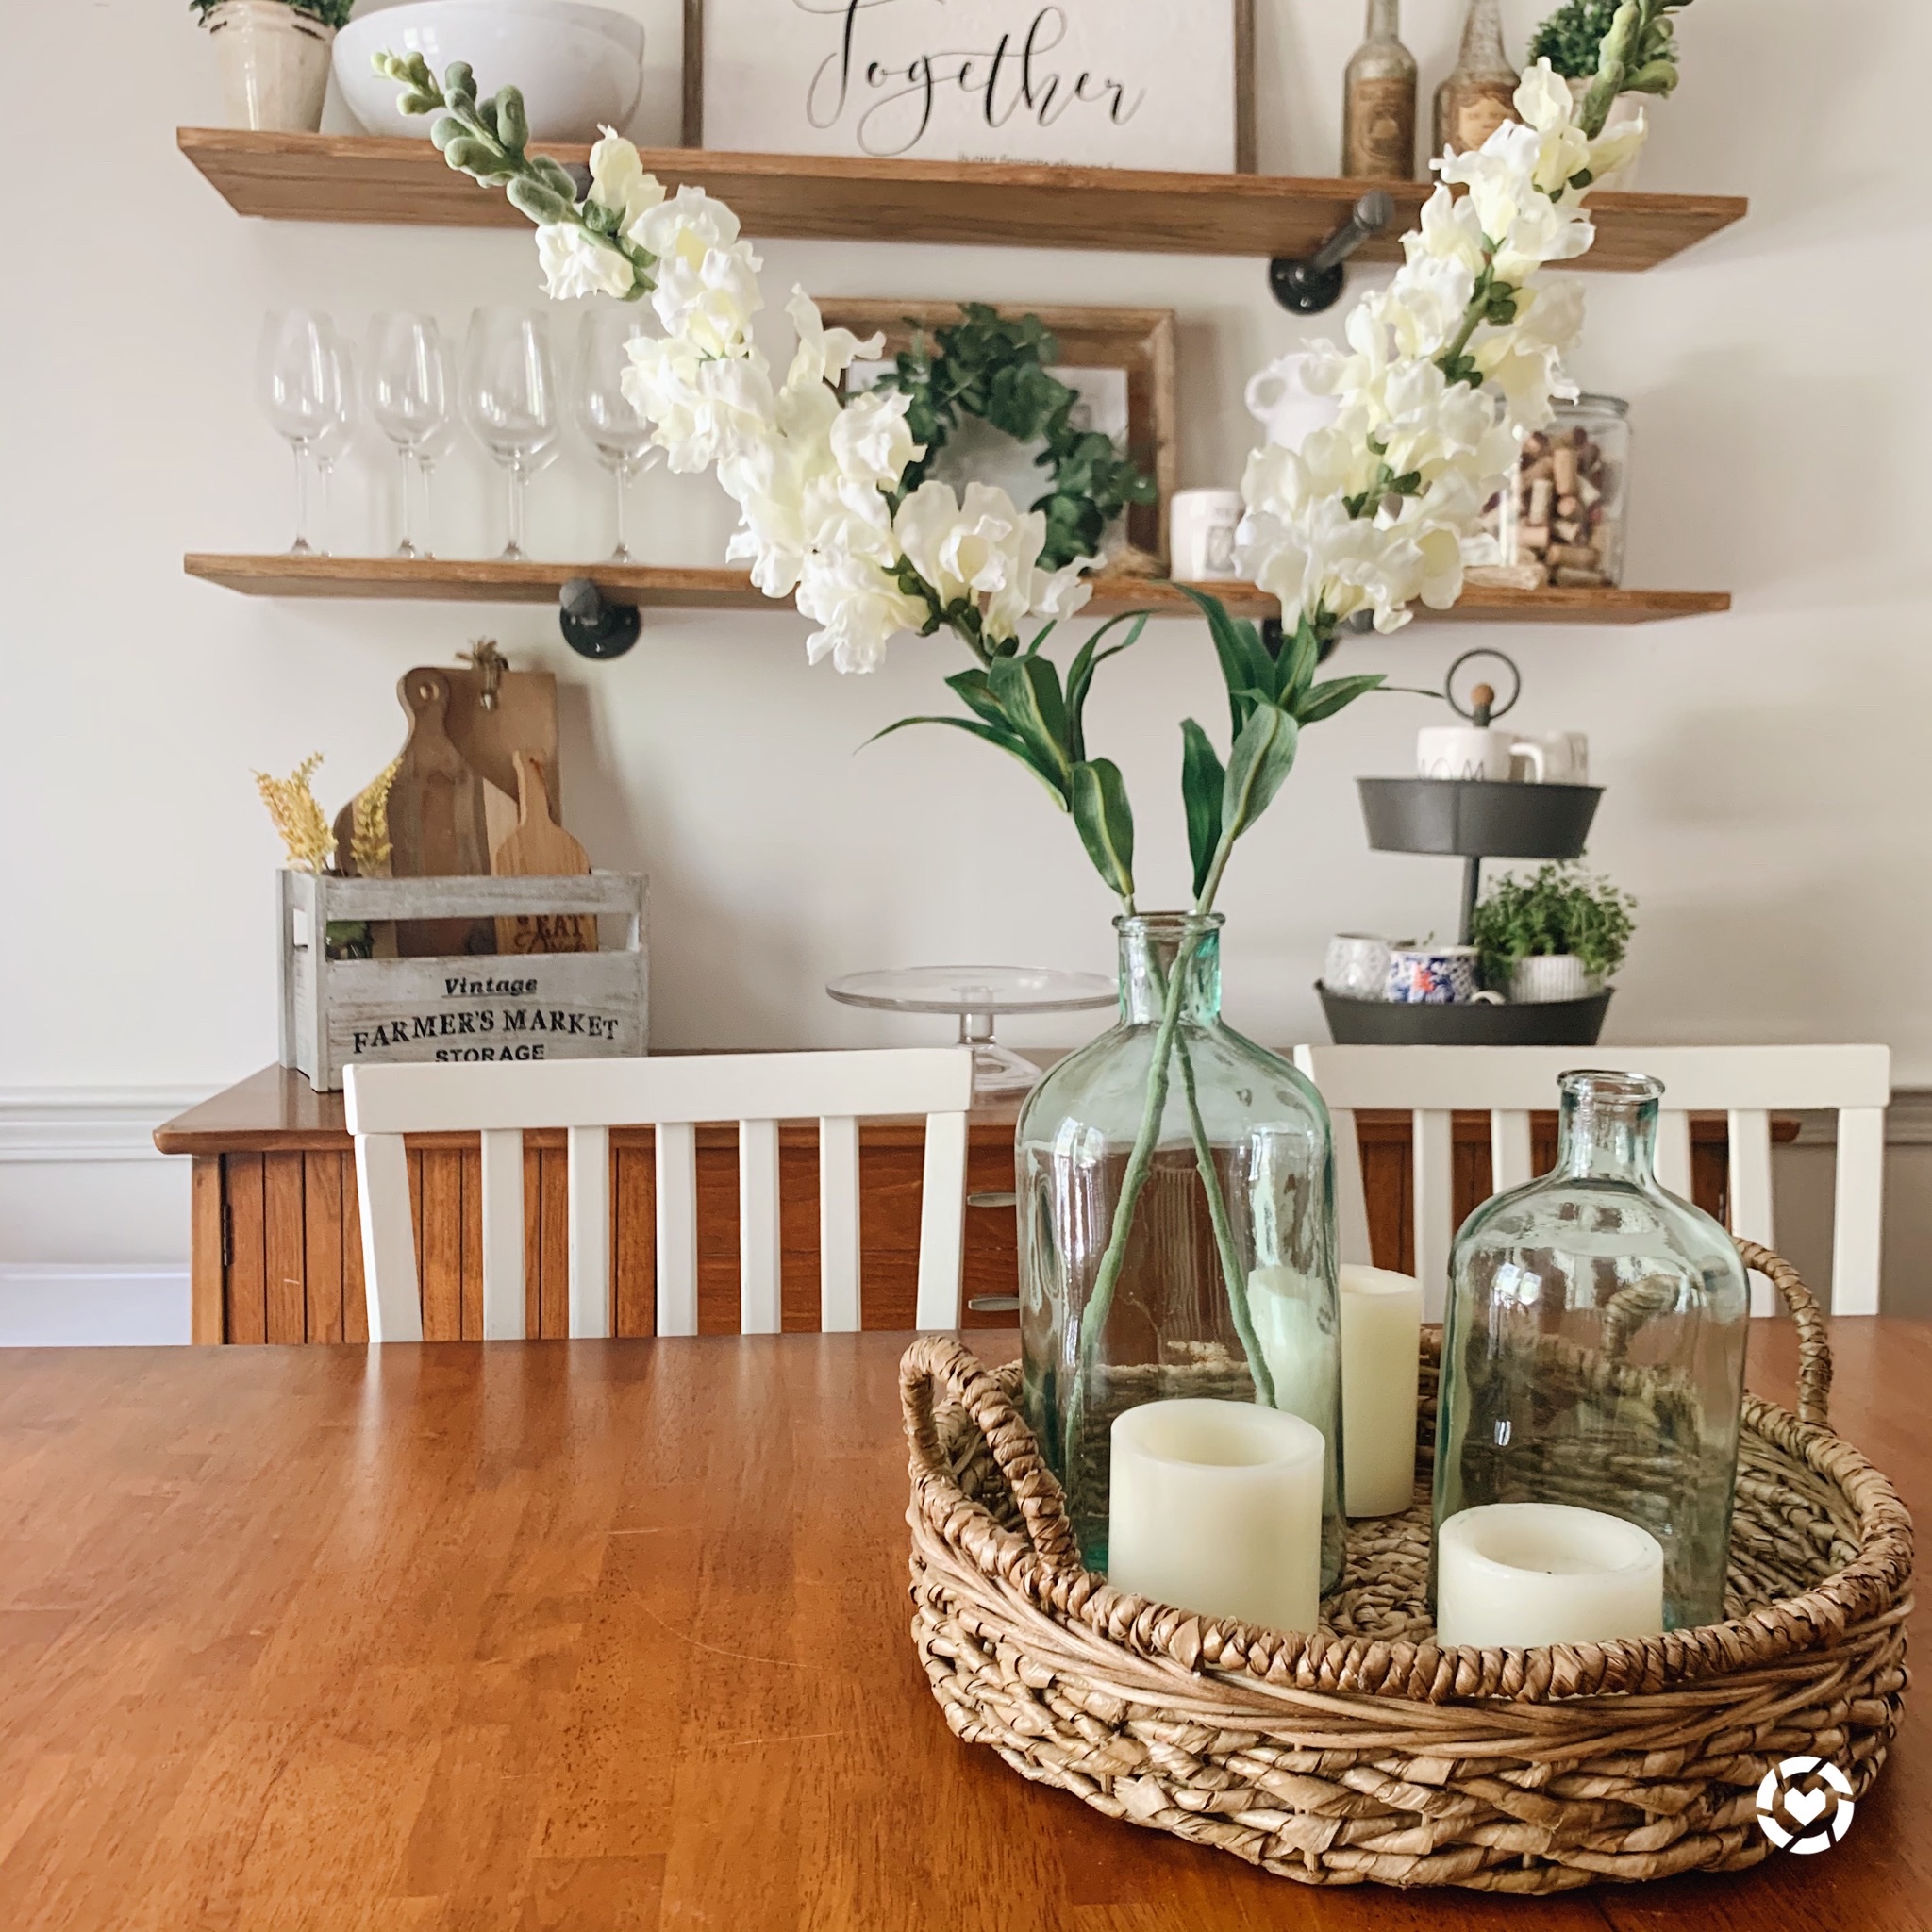 Dining Room Decor: From Spring to Summer